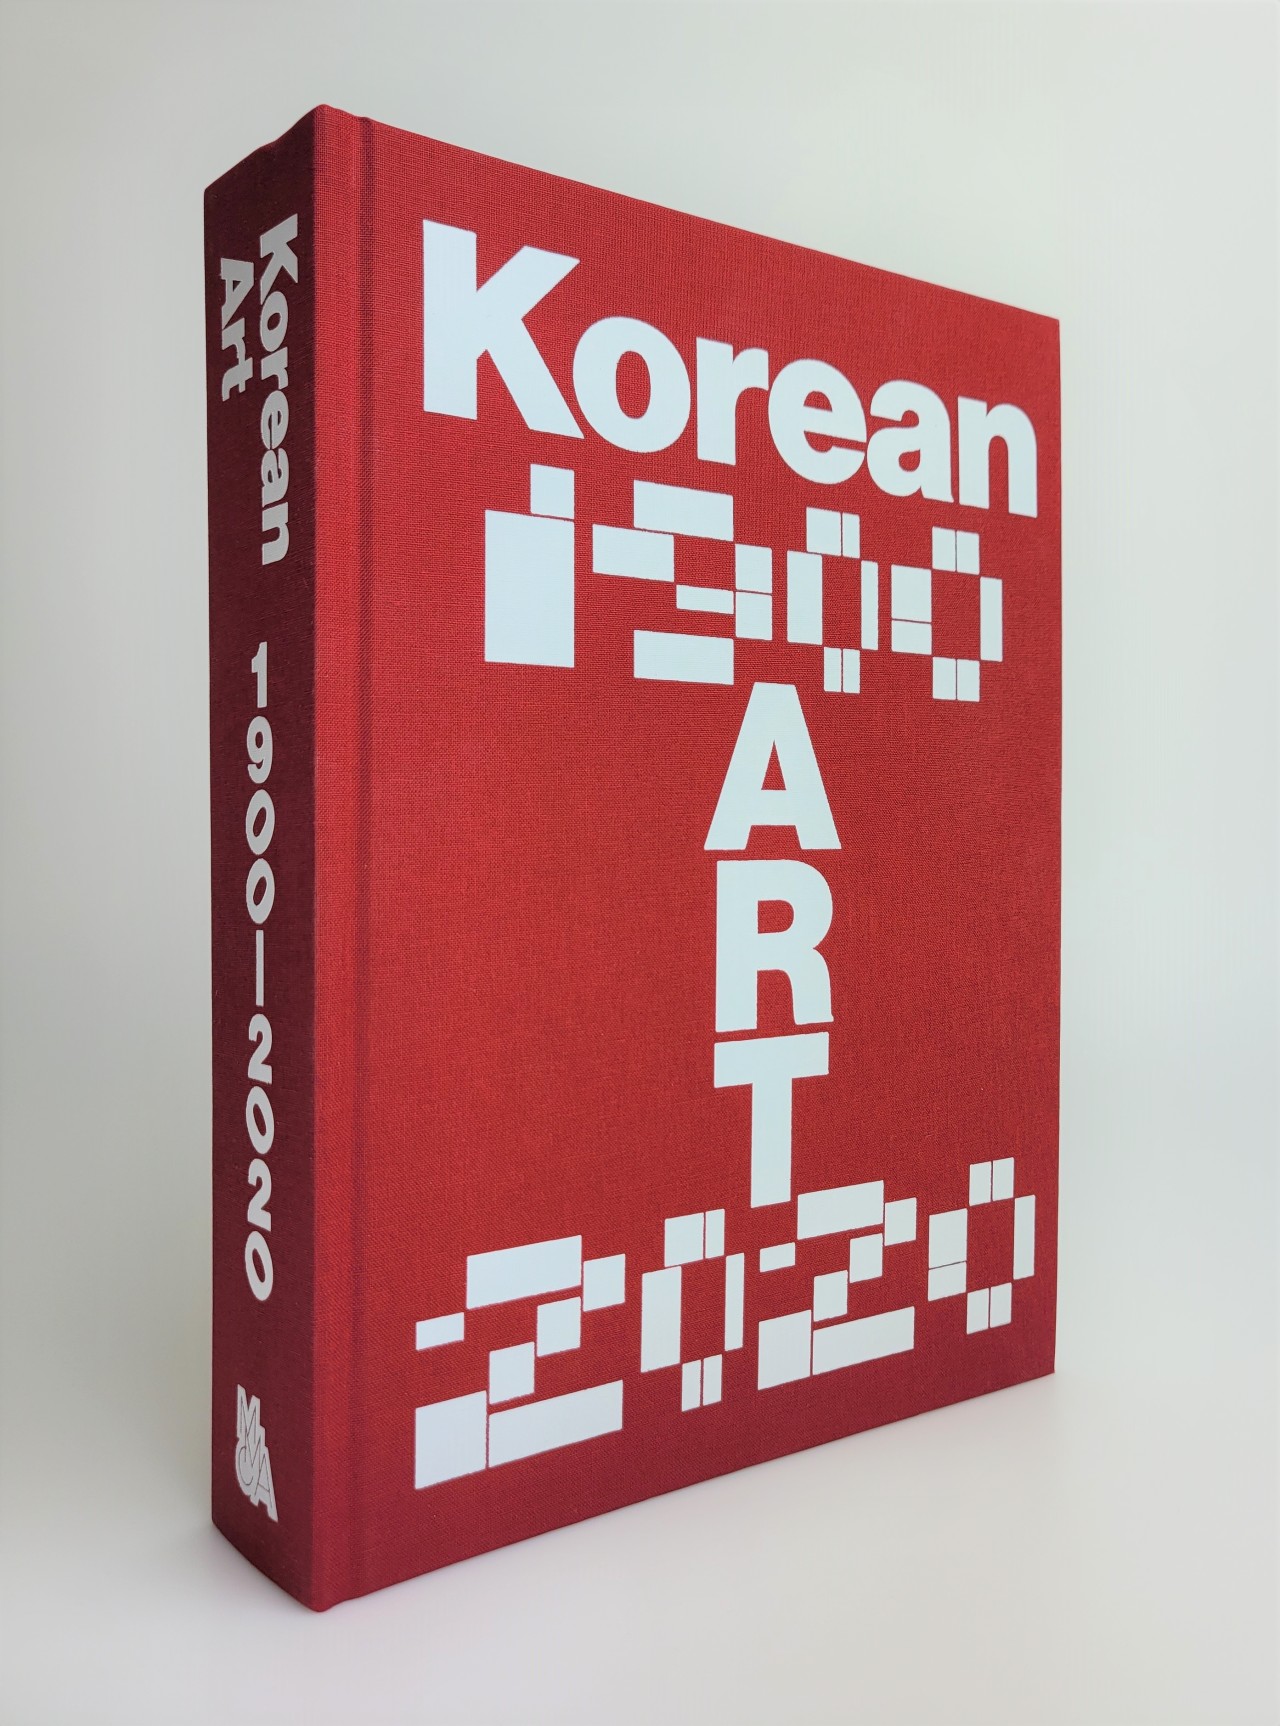 “Korean Art 1900-2020” published by National Museum of Modern and Contemporary Art, Korea (MMCA)